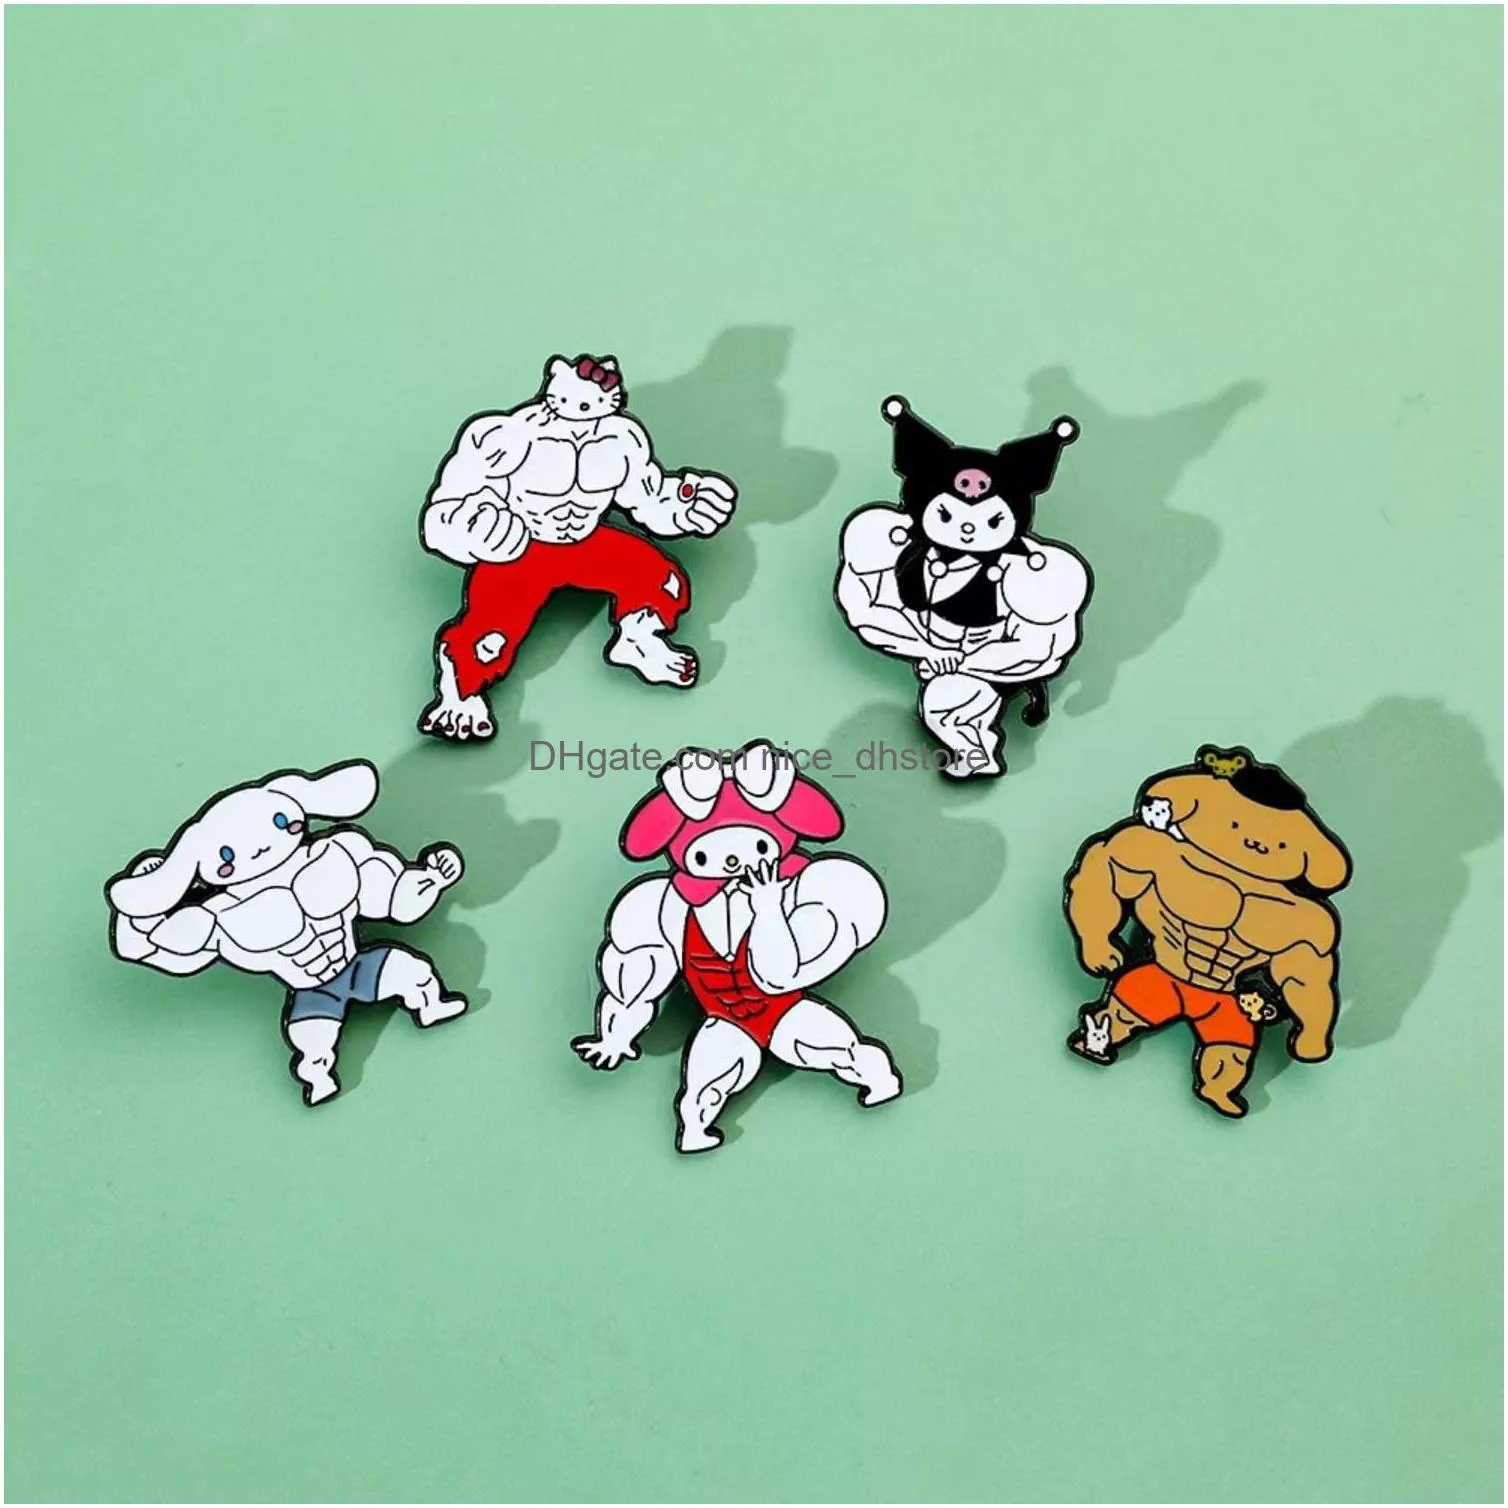 funny cartoon kitty brooch pins for adults cute enamel lapel pins for bag backpacks clothing jackets hats gift for children women